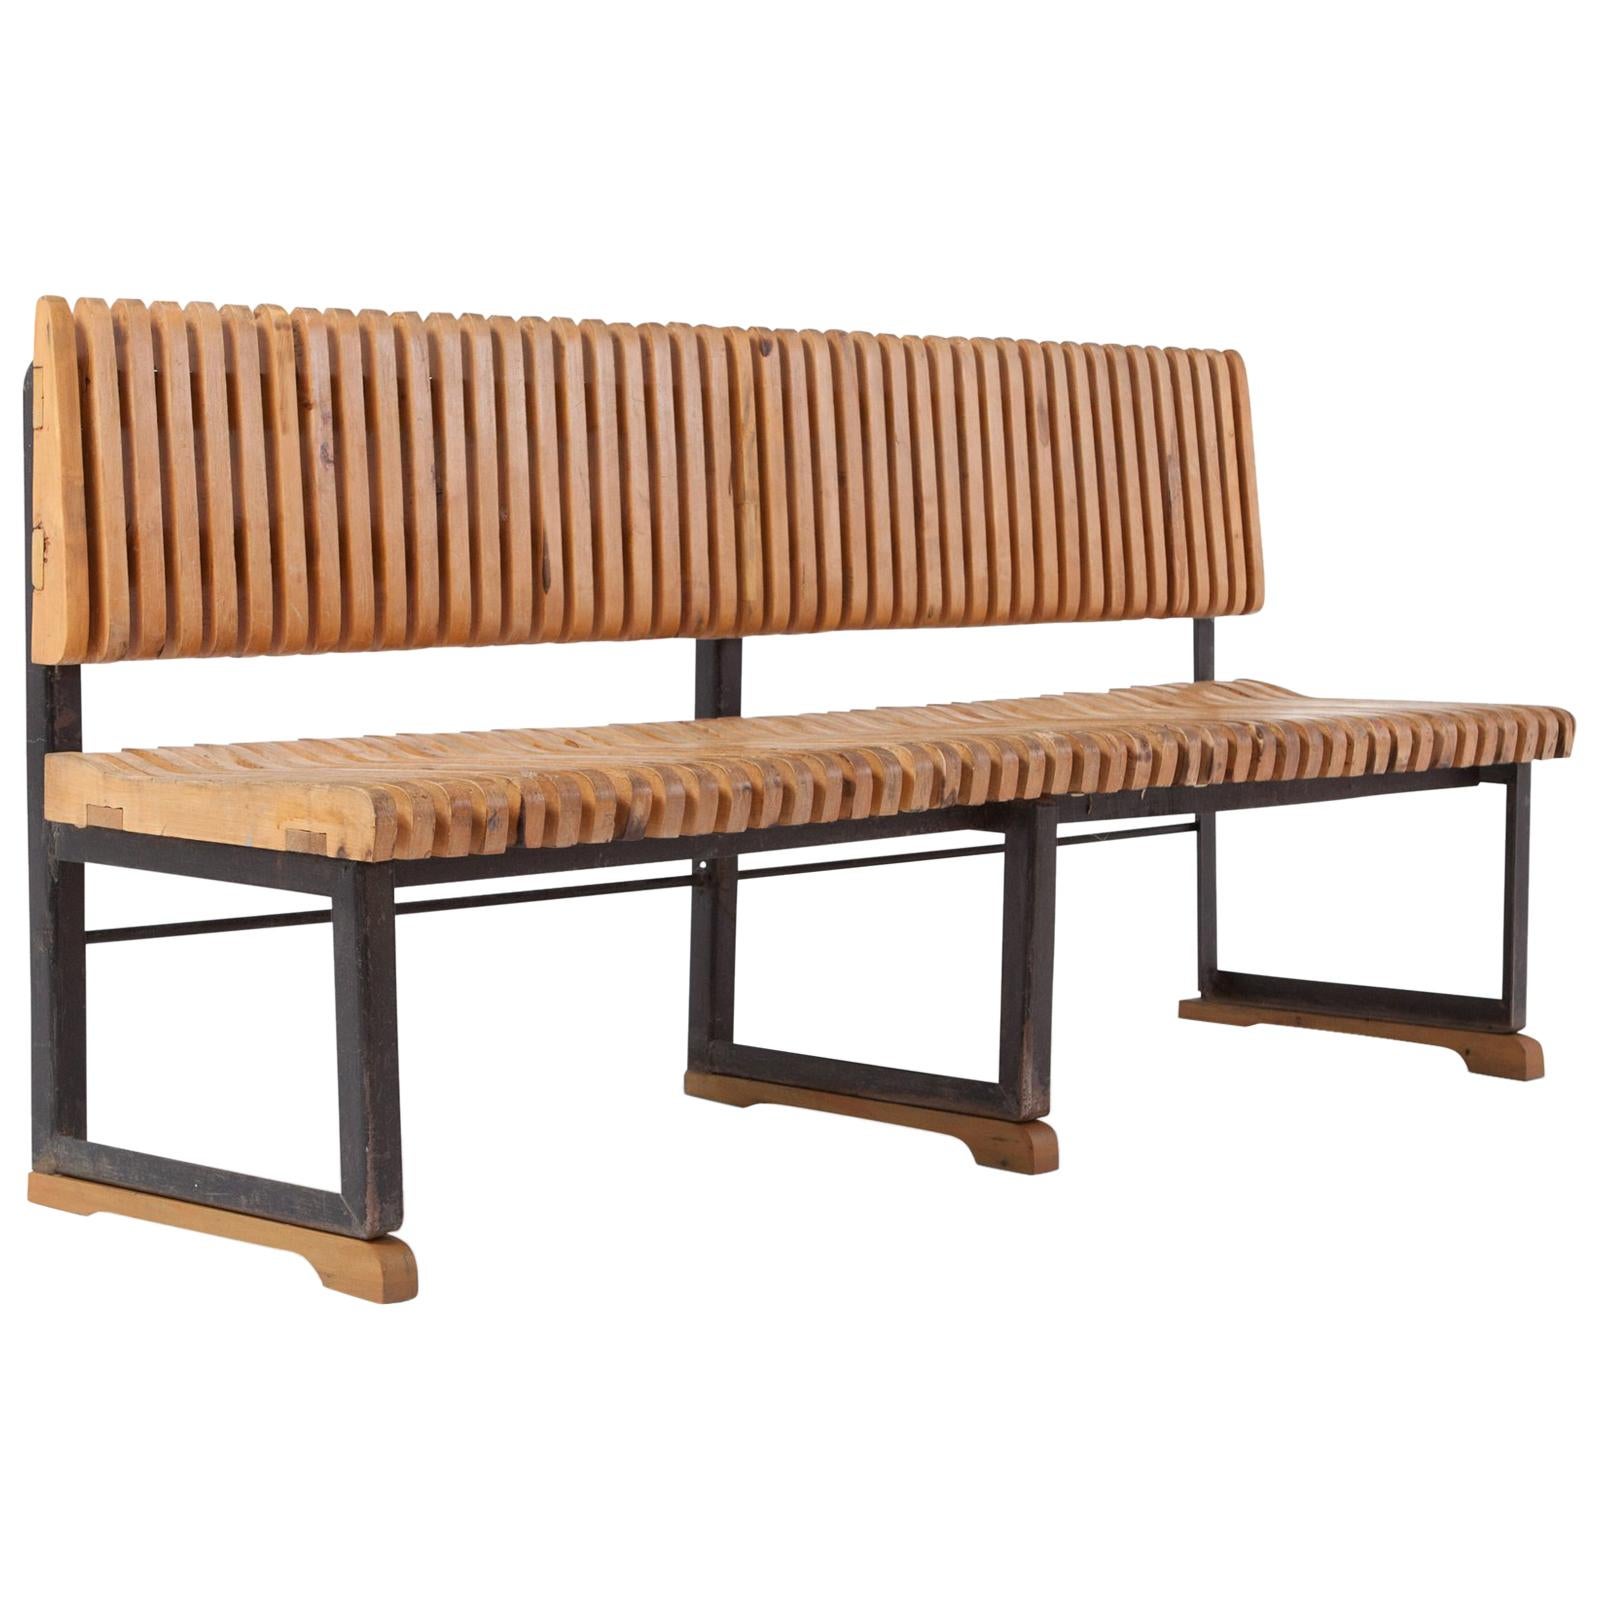 Midcentury bench, Dutch design from the 1960s

Slatted bench in solid pine with a black lacquered steel frame. The bench show multiple marks of wear consistent with age and use, giving it a lot of character and a very robust and impressive